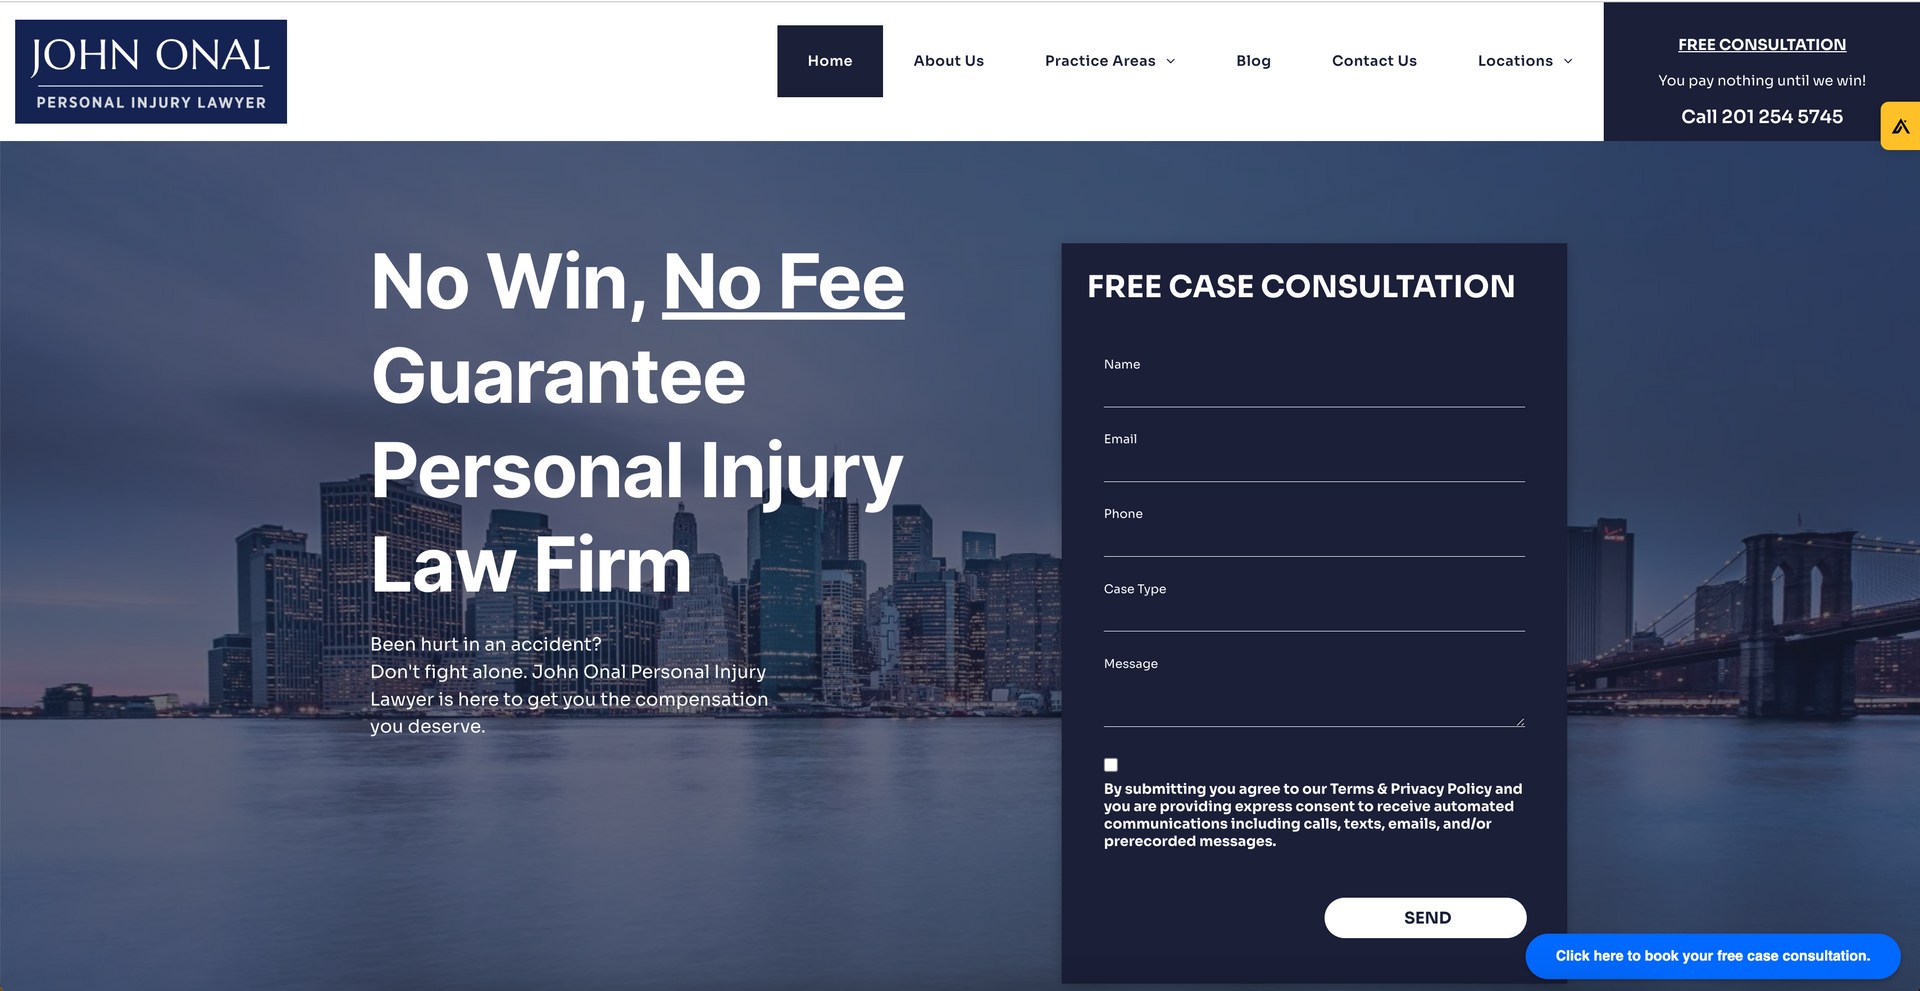 John Onal Personal Injury lawyer website designed by Scale and Sword advertising. 